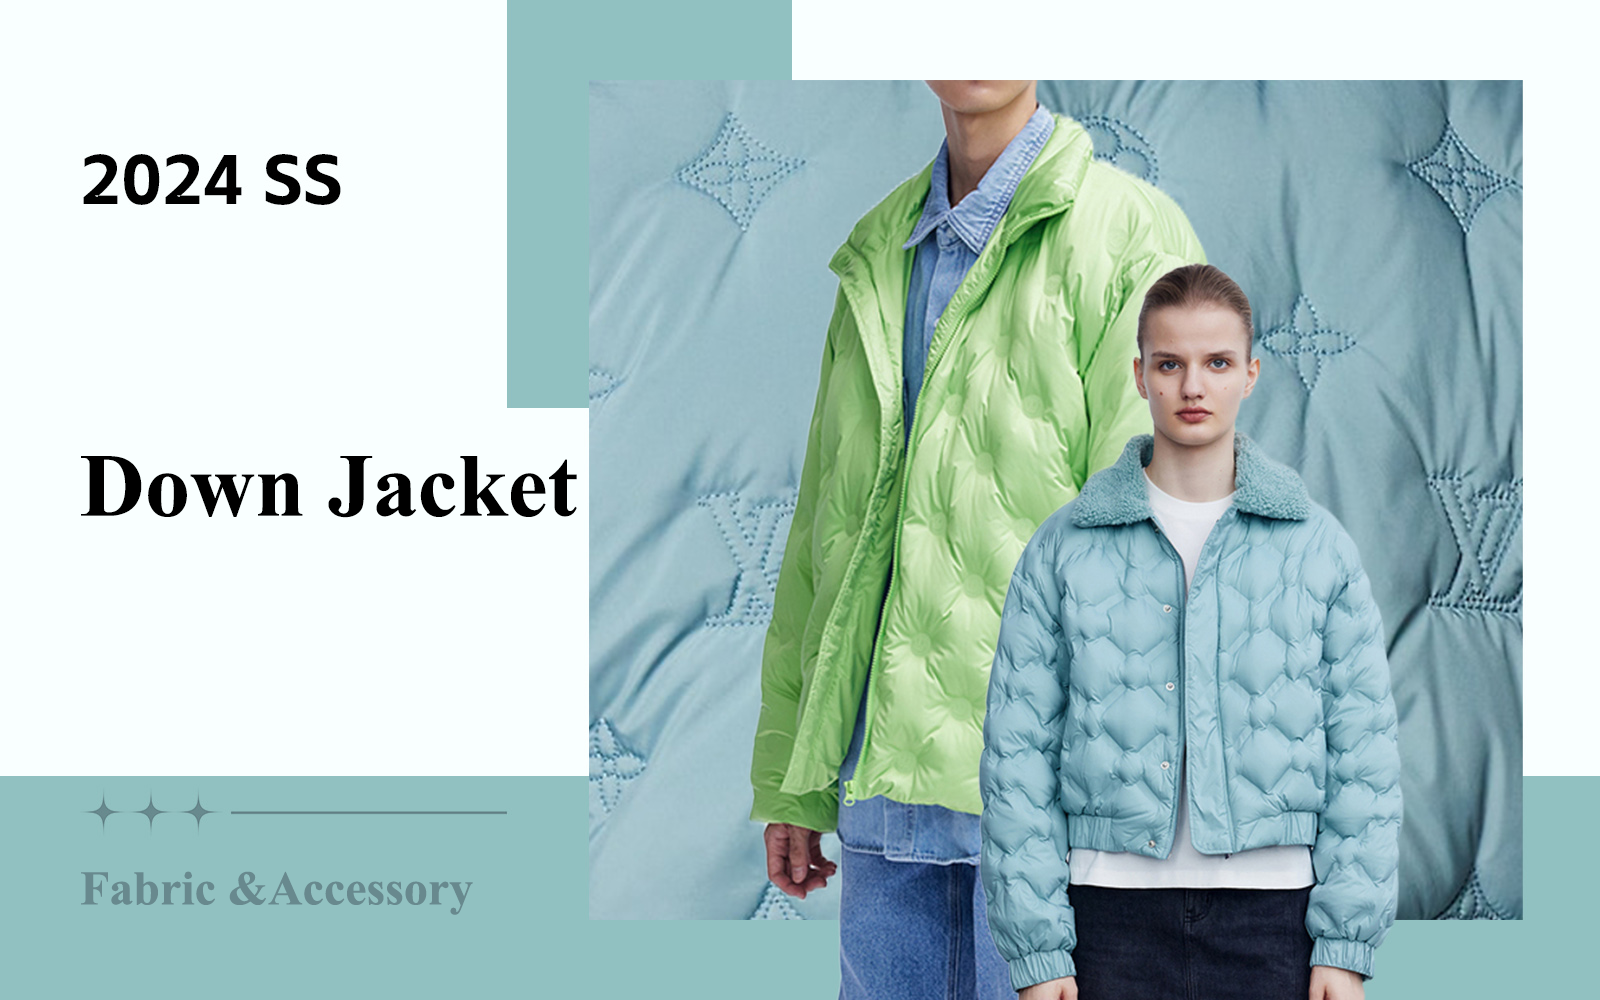 Padding -- The Fabric Trend for Down Jacket